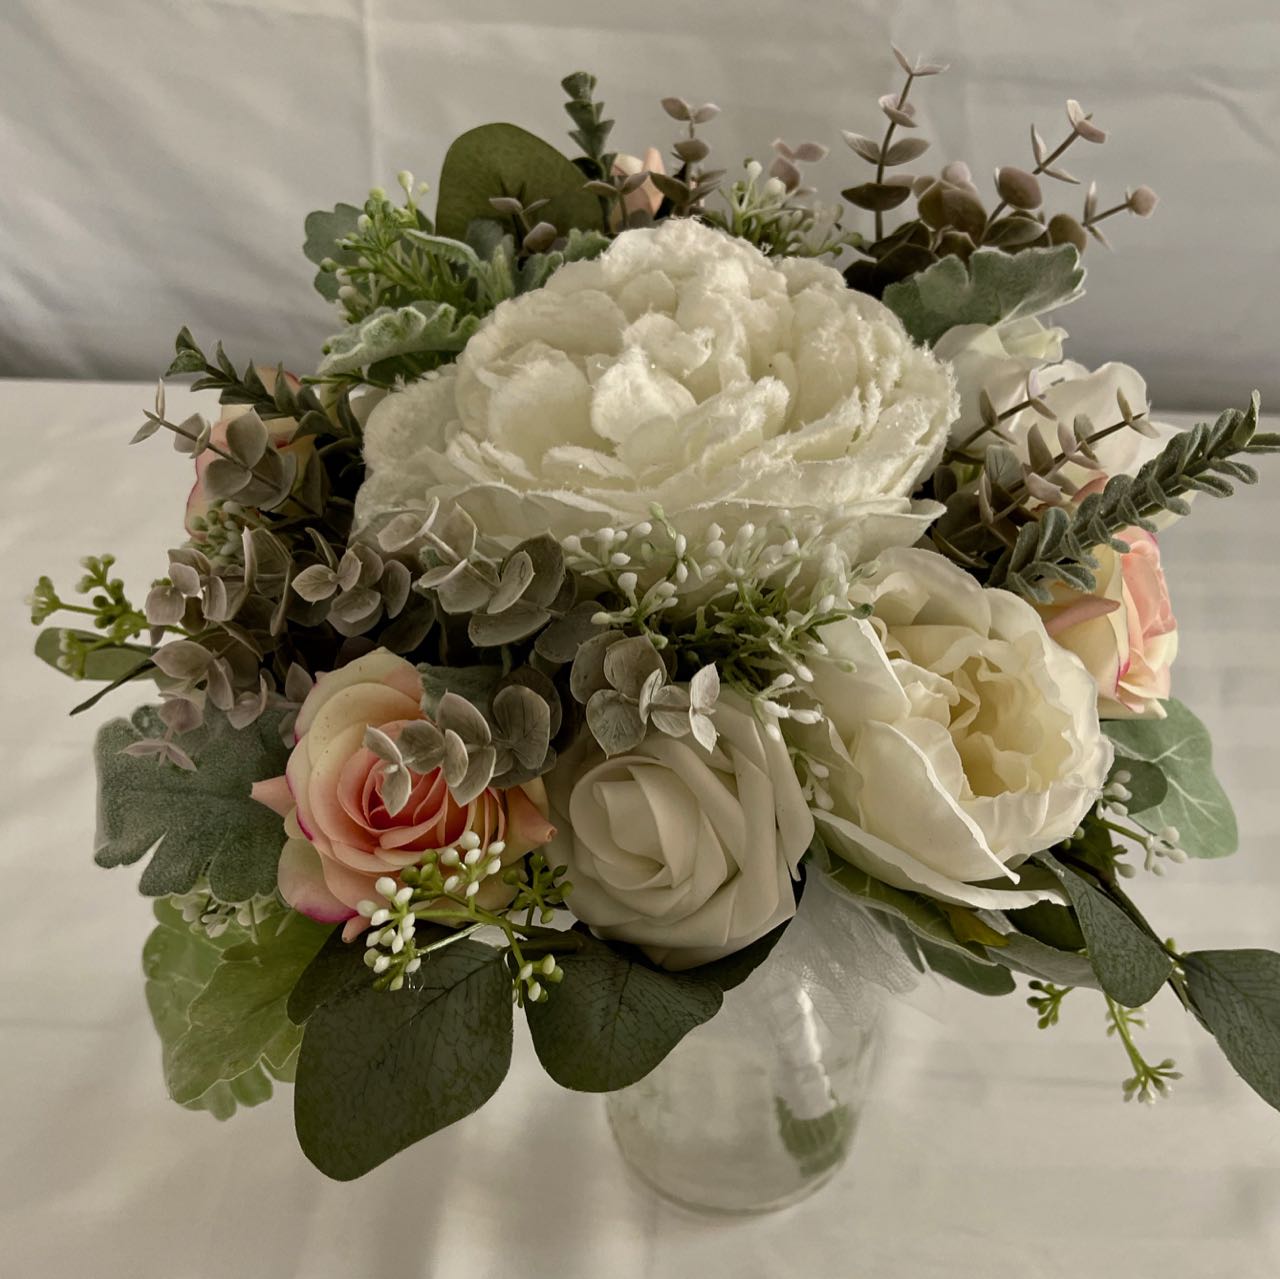 Bridal Bouquet- sage green eucalyptus  combined with white and blsuh pink roses - Rent for five days for $88.00